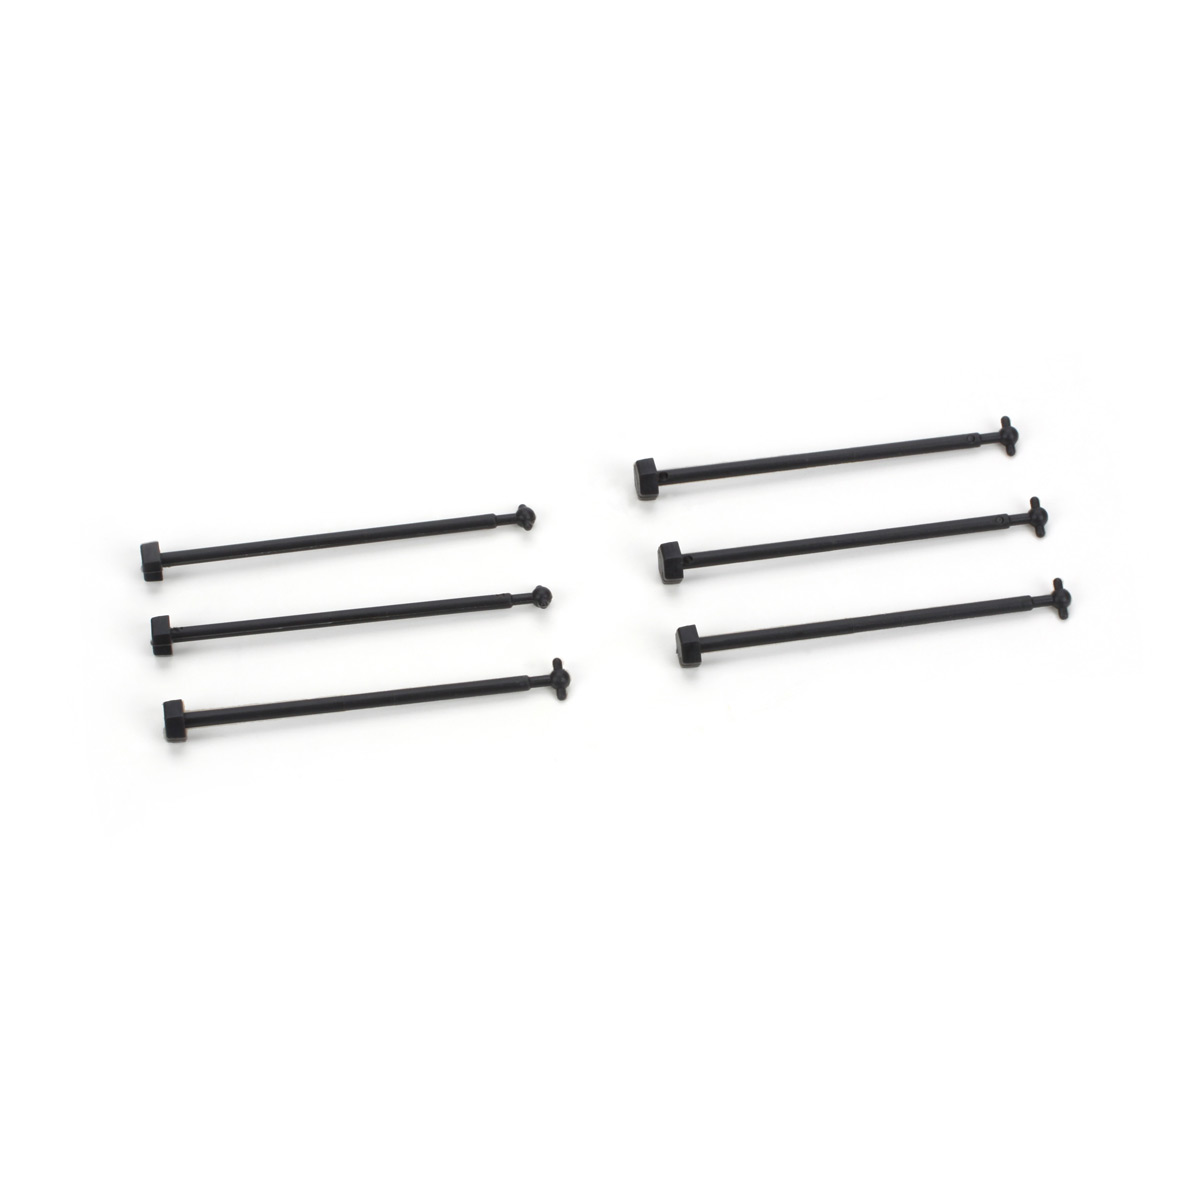 Athearn 90117 - HO Dogbone for SD70/75 - 1.94 inches (6pk)